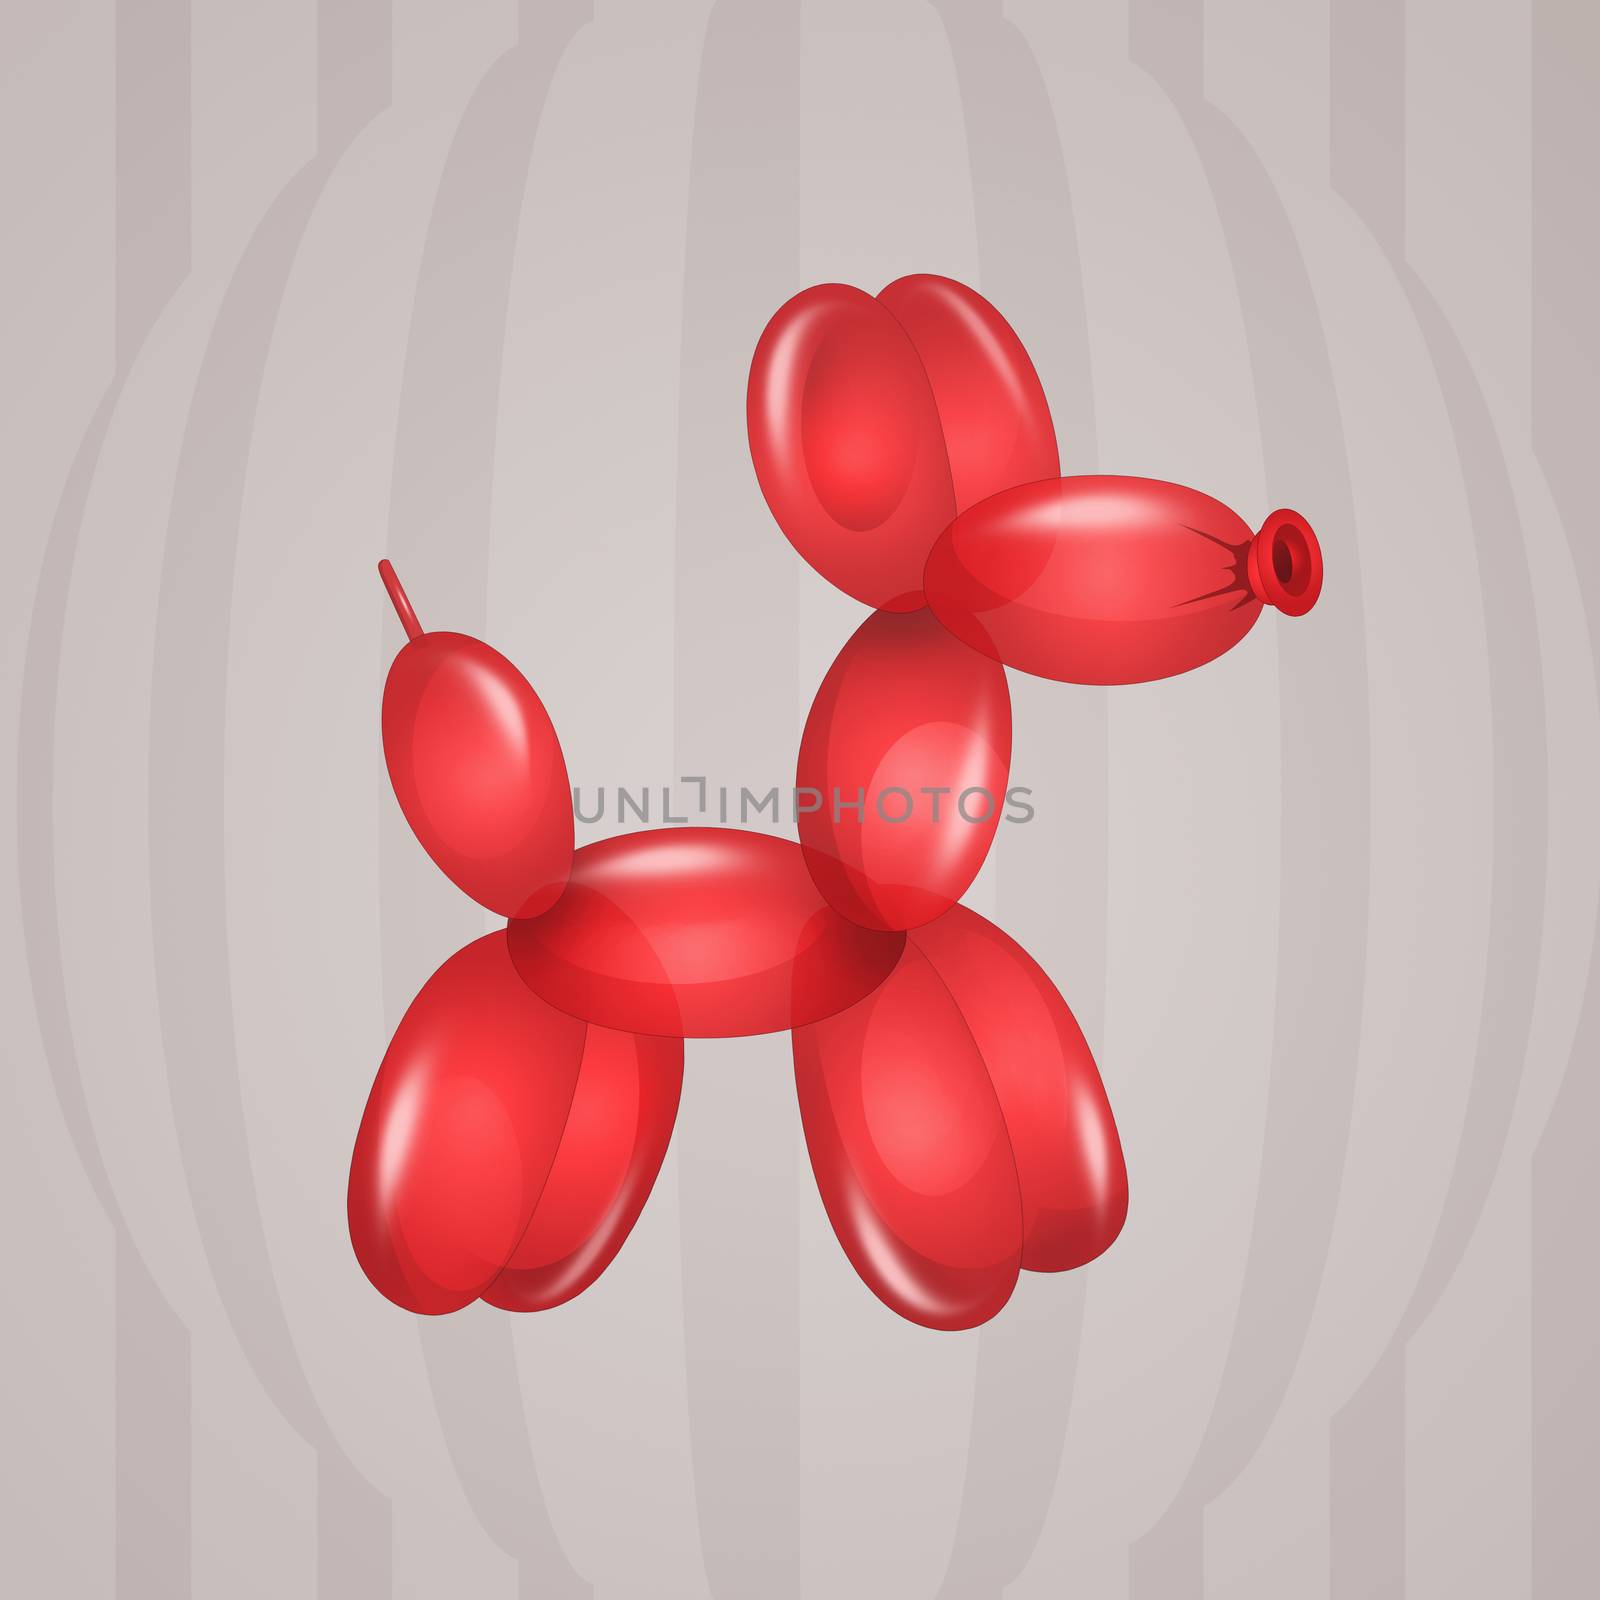 balloon in the shape of a dog by adrenalina